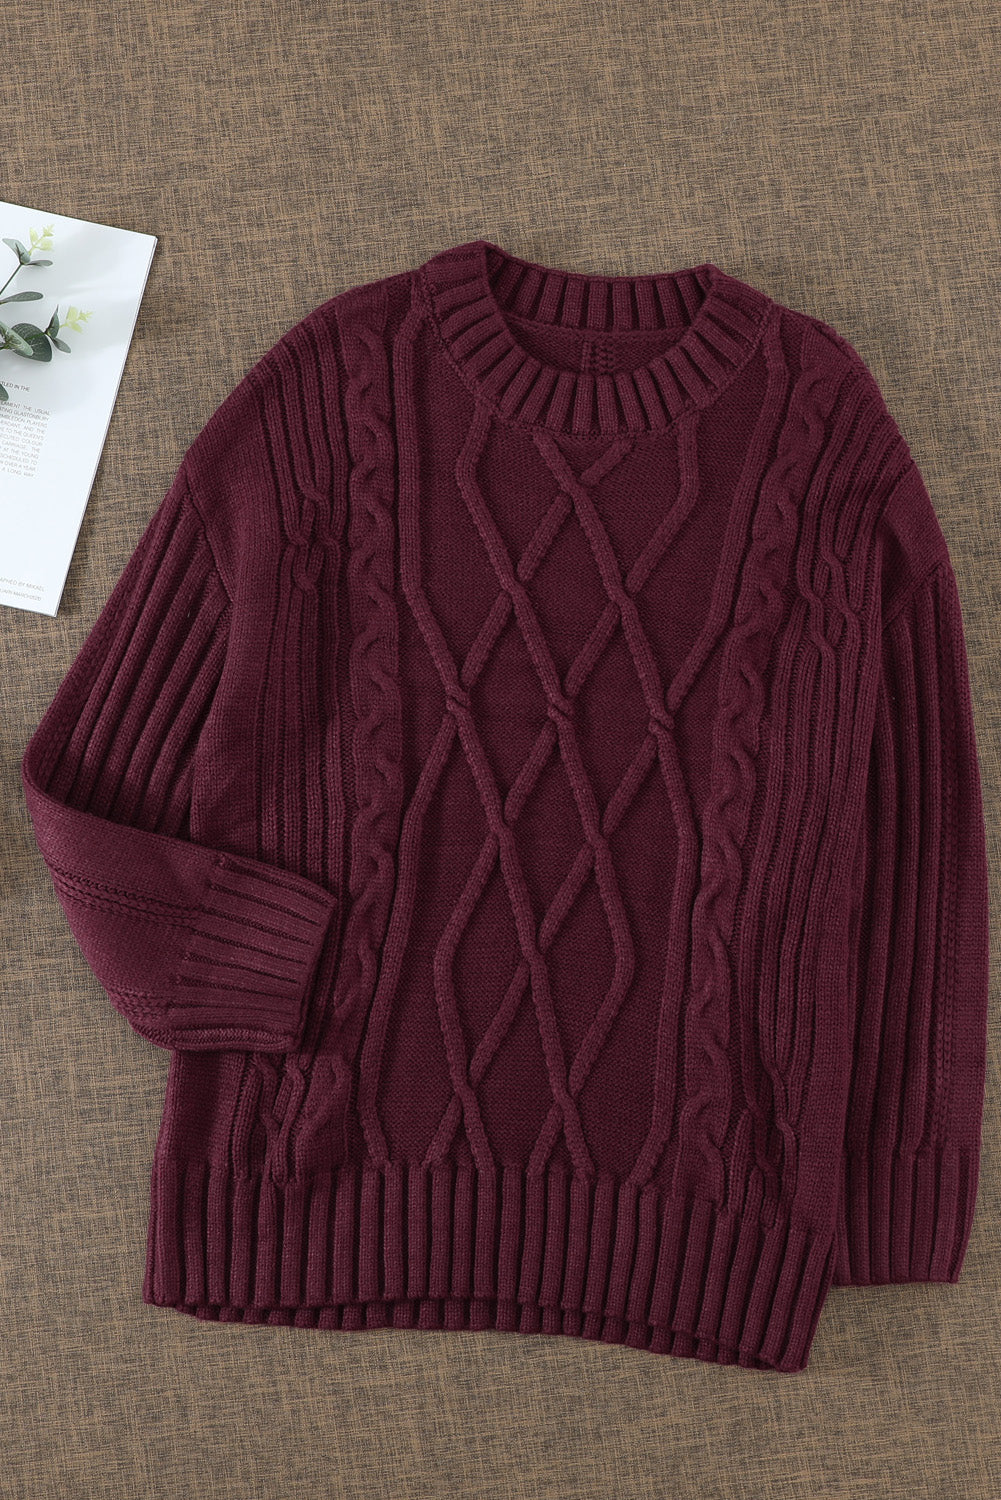 Winter Burgundy Oversize Thick Pullover SweaterWinter Burgundy Oversize Thick Pullover Sweater